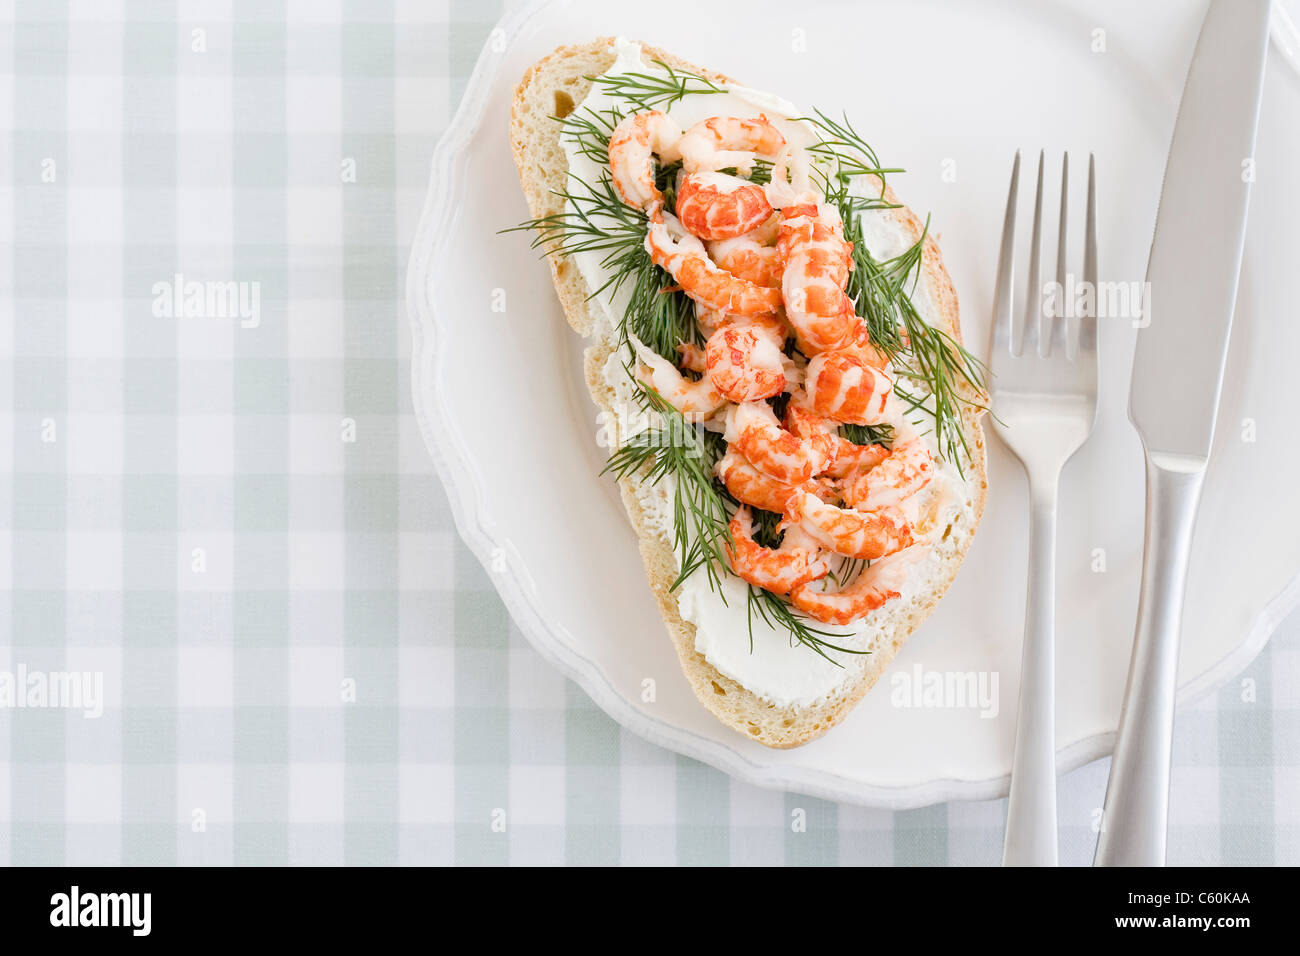 Plate with crayfish sandwich Stock Photo